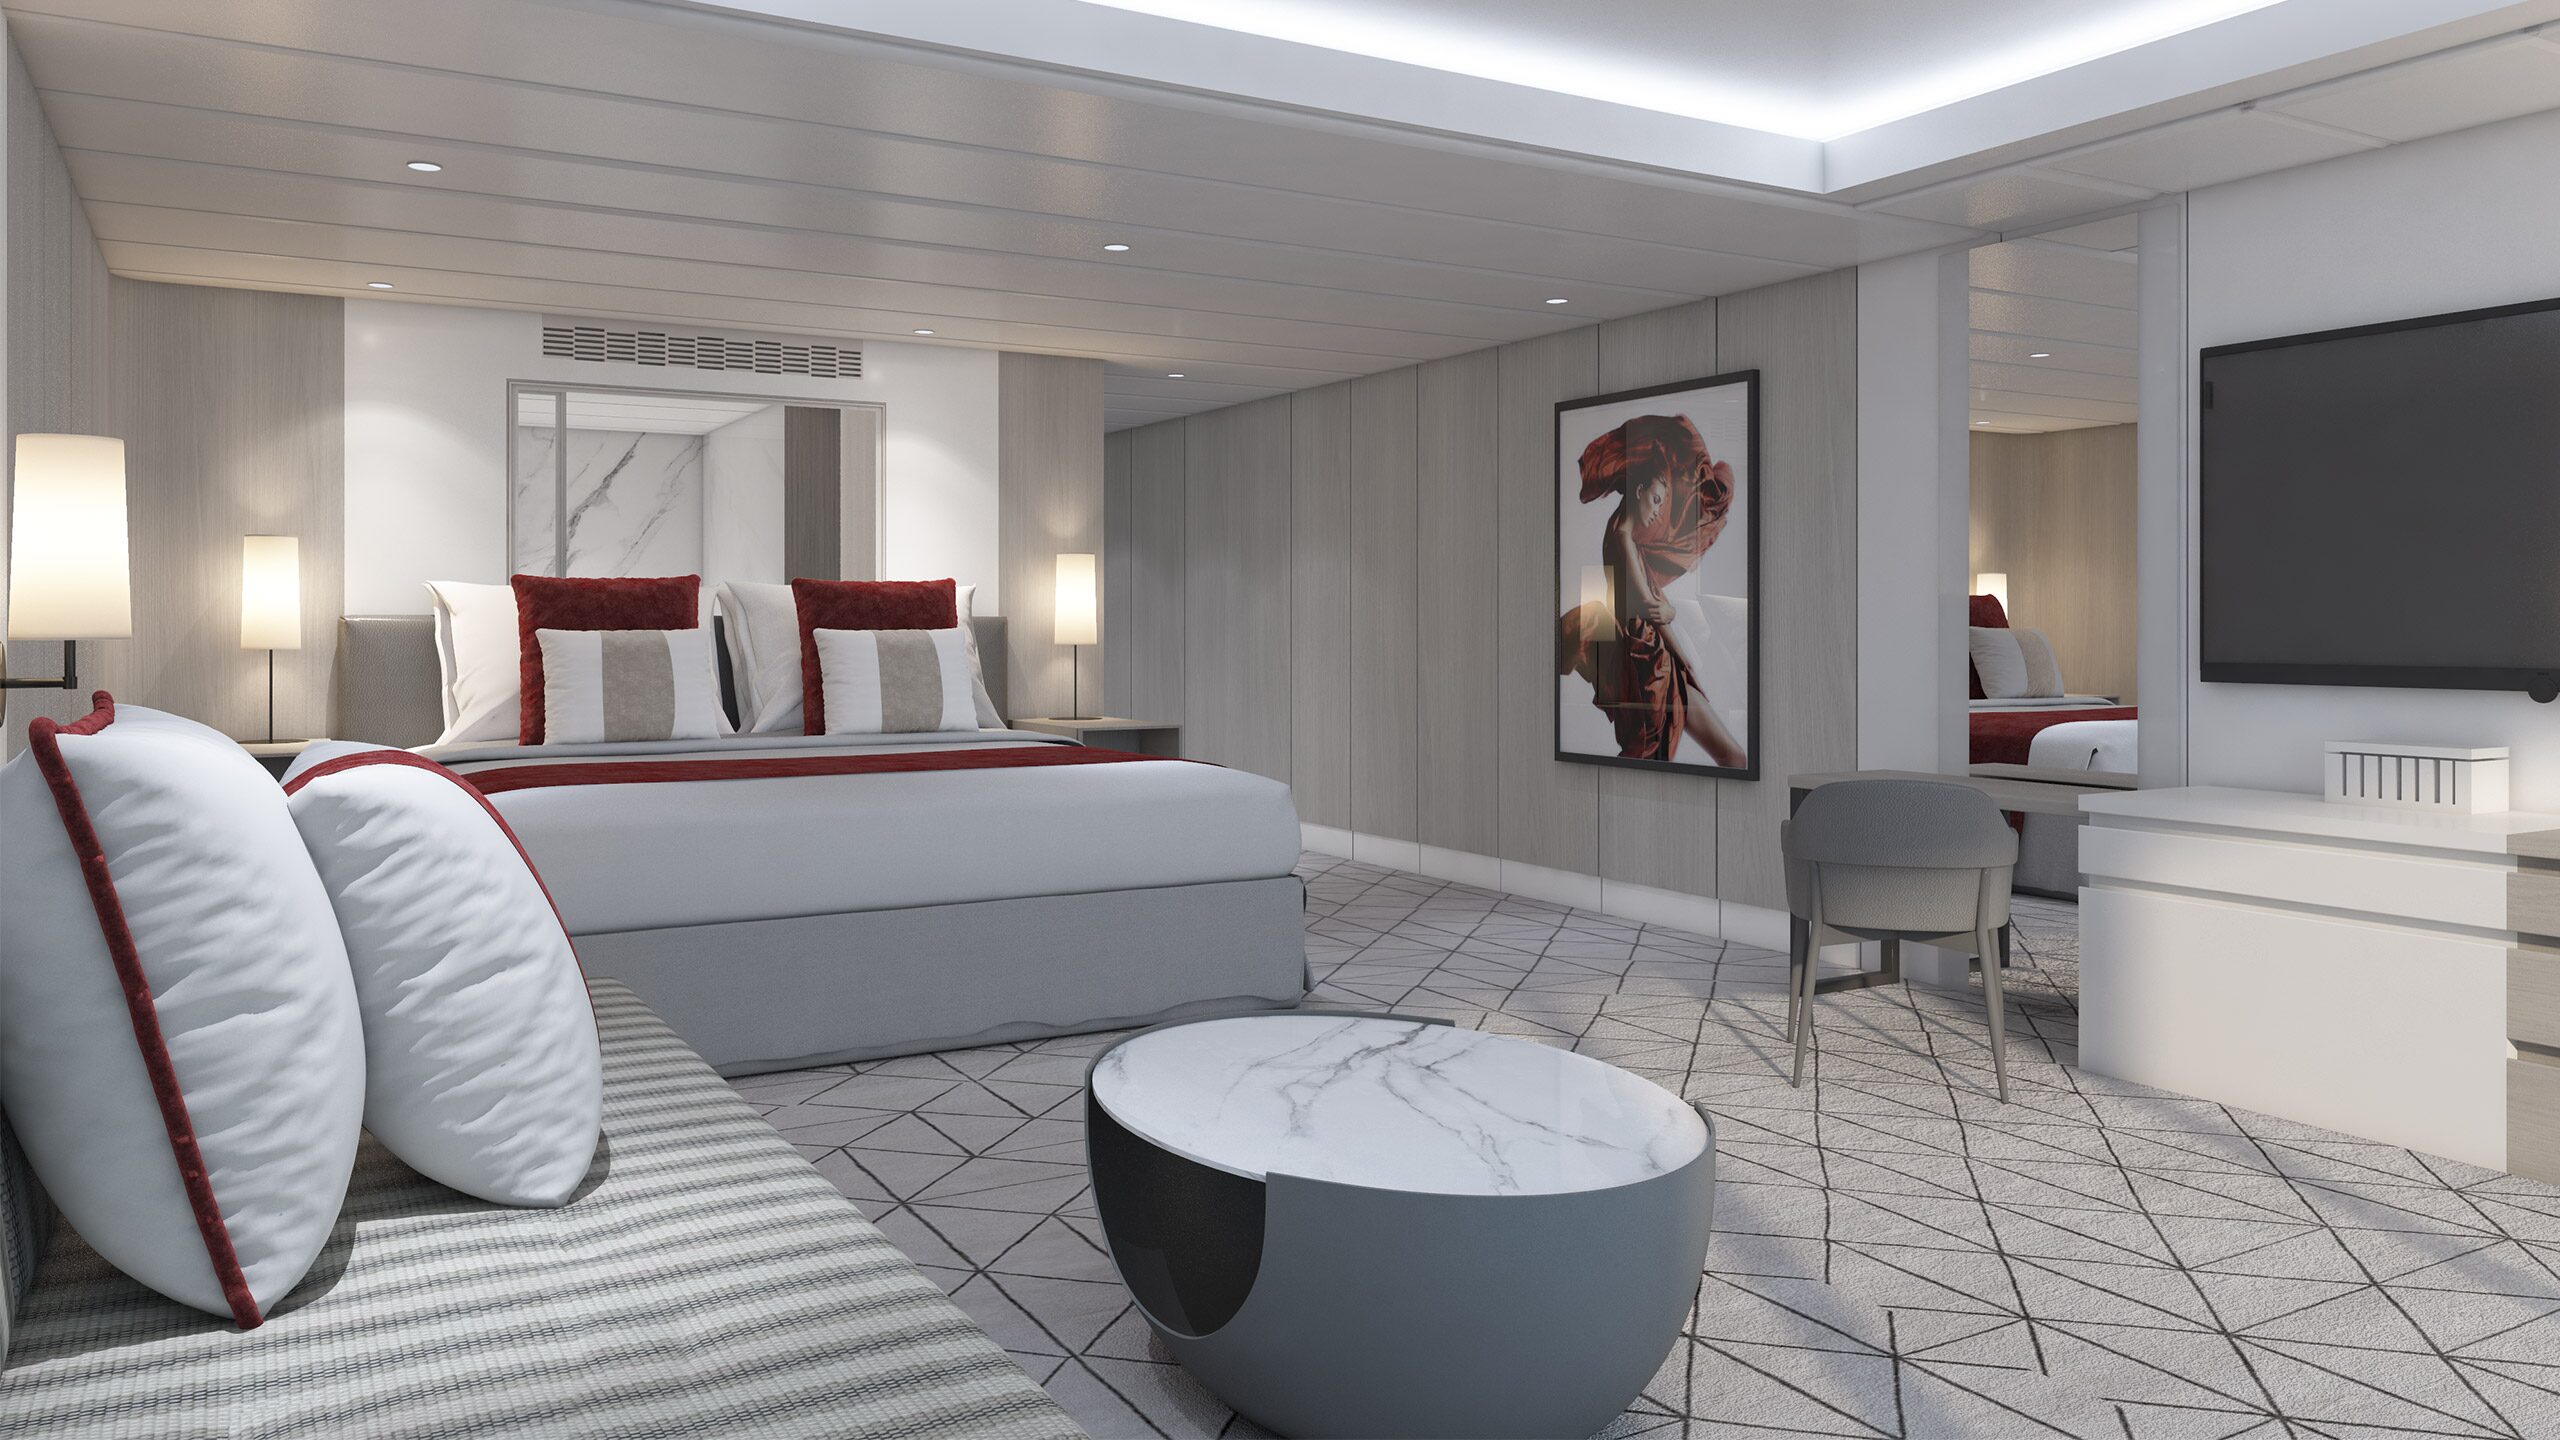 https://www.celebritycruises.com/content/dam/celebrity/new-images/ships/beyond-renderings/aquaclass-sky-suite-rendering-celebrity-beyond-2560x1440.jpg